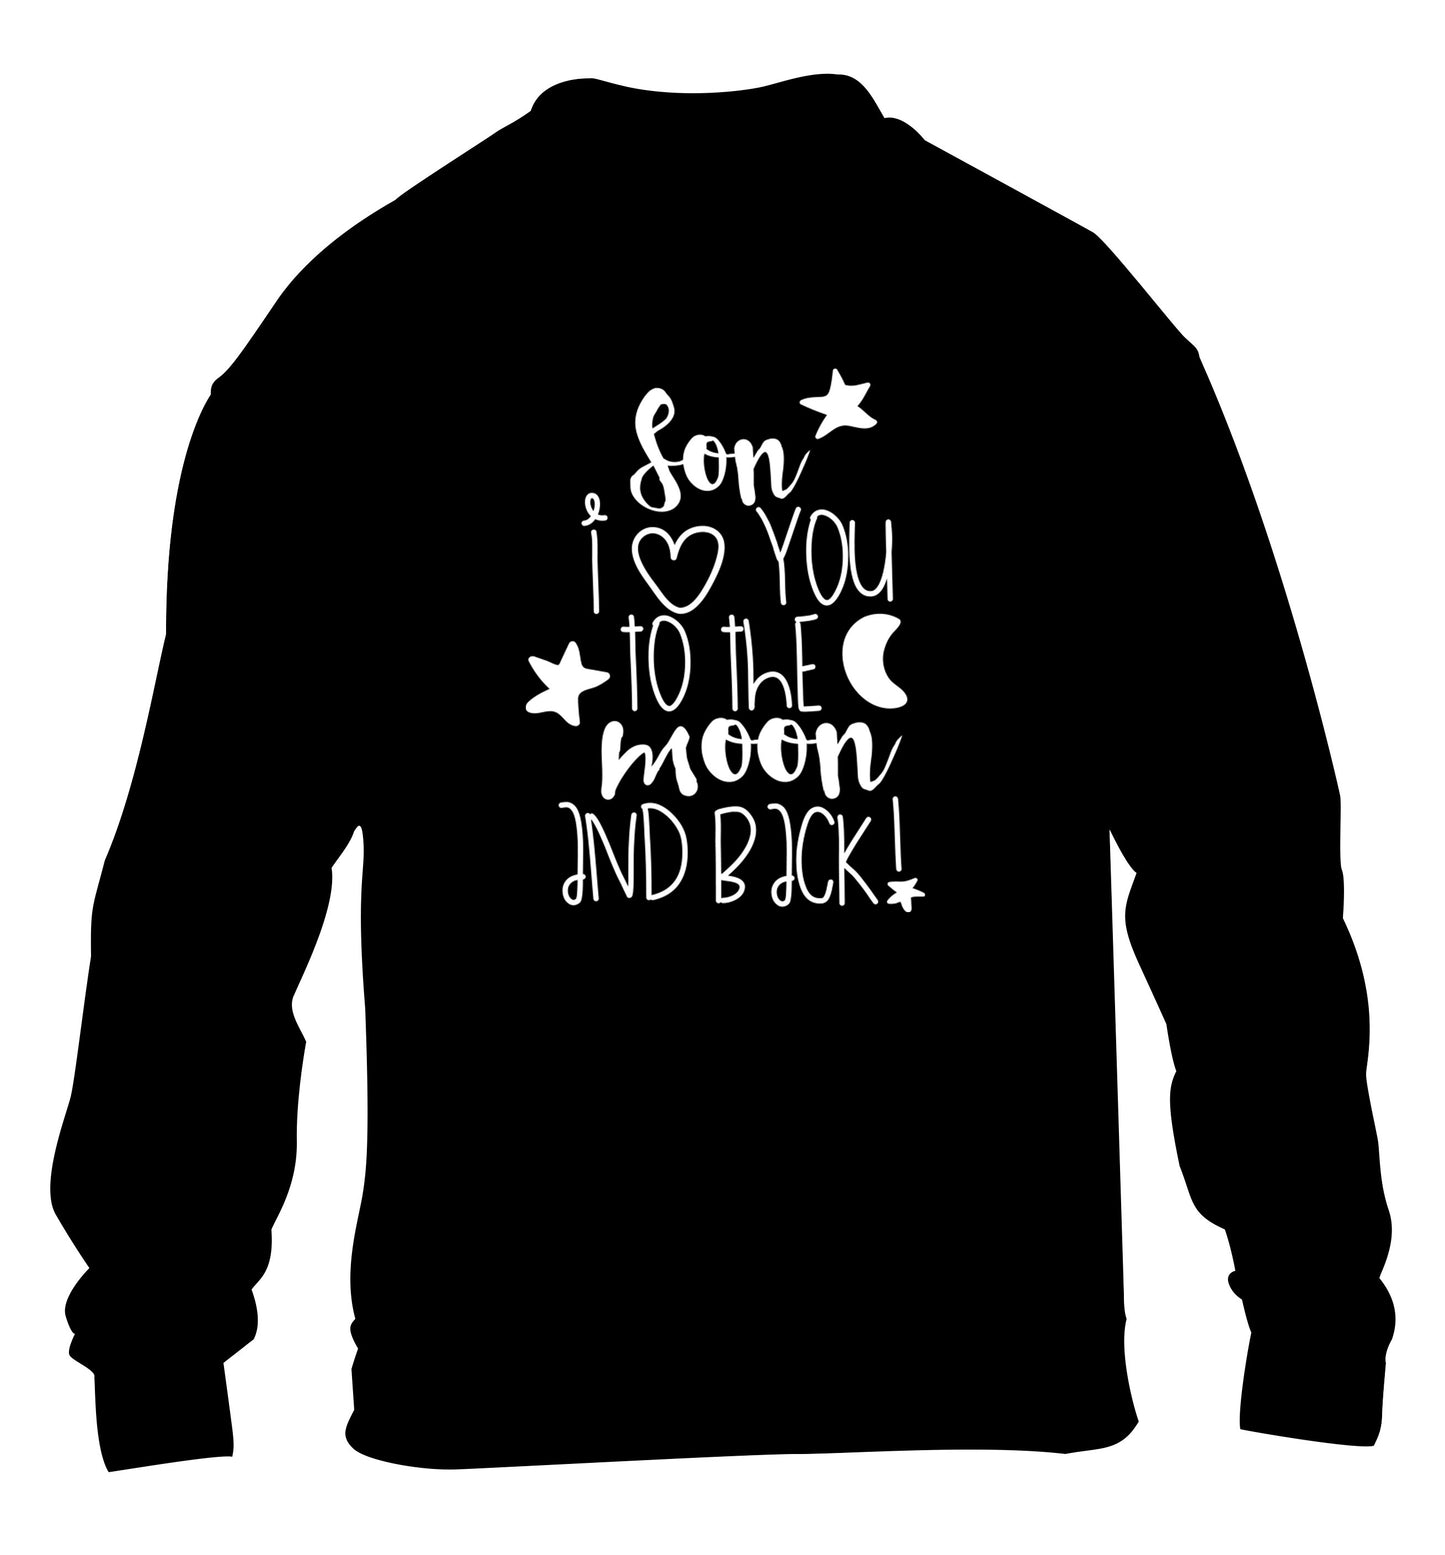 Son I love you to the moon and back children's black  sweater 12-14 Years